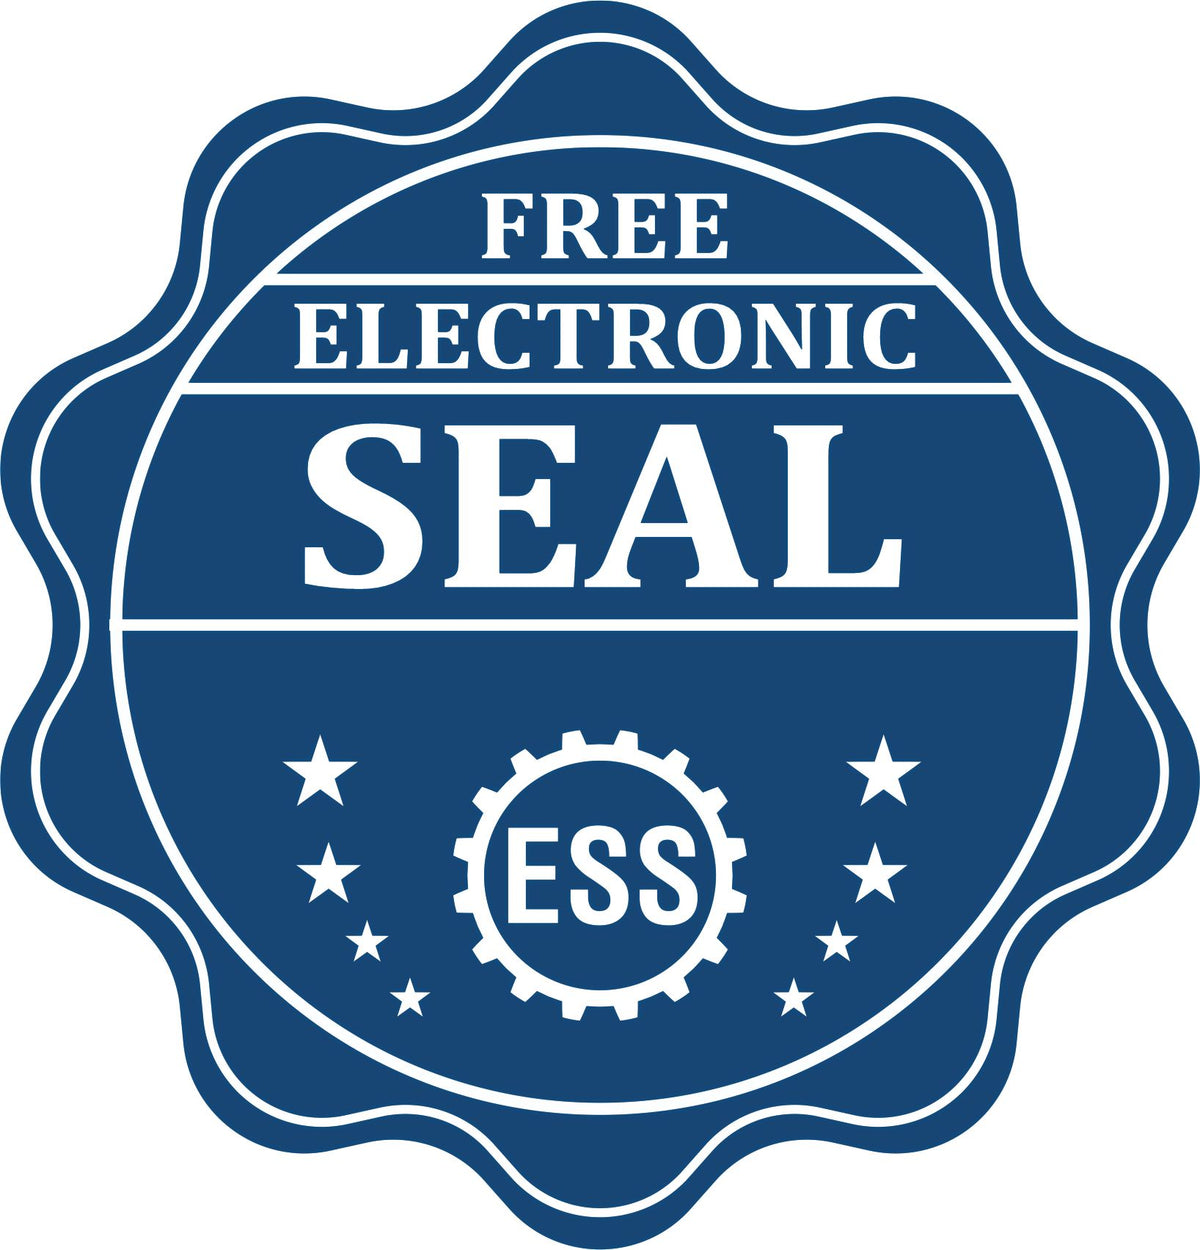 A badge showing a free electronic seal for the Gift Virginia Land Surveyor Seal with stars and the ESS gear on the emblem.